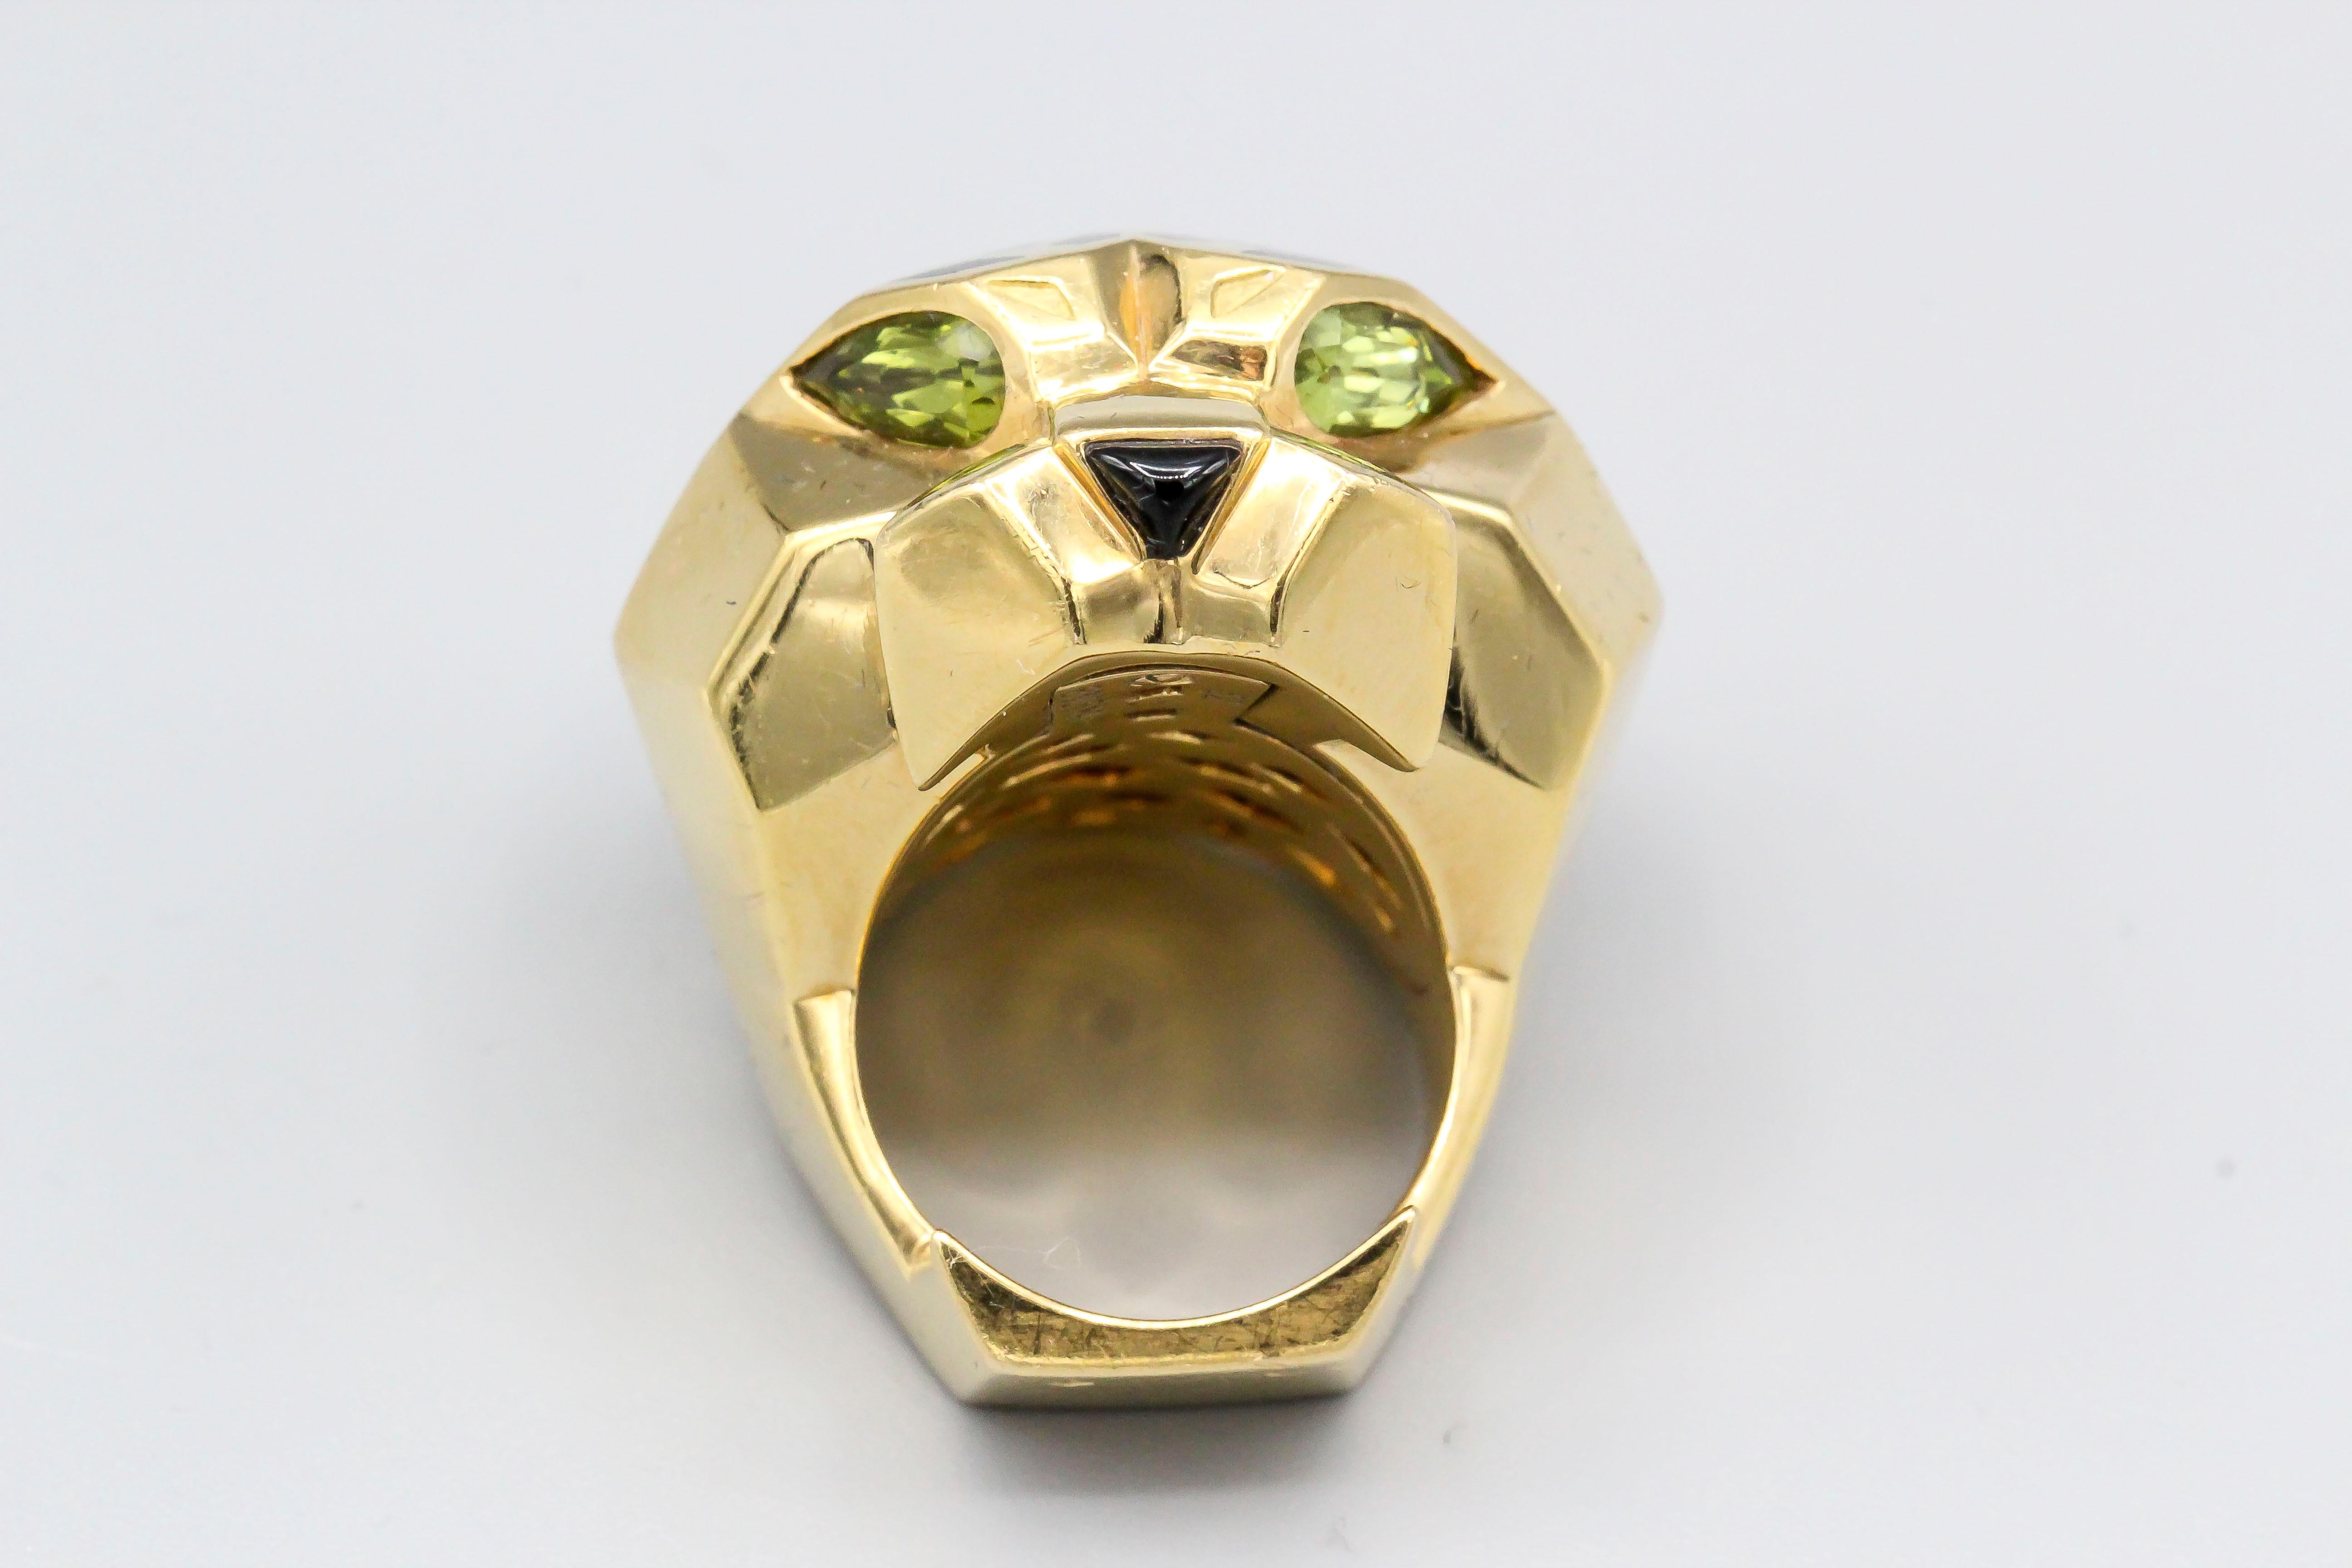 Impressive peridot, onyx, 18K yellow gold and laquer ring from the 